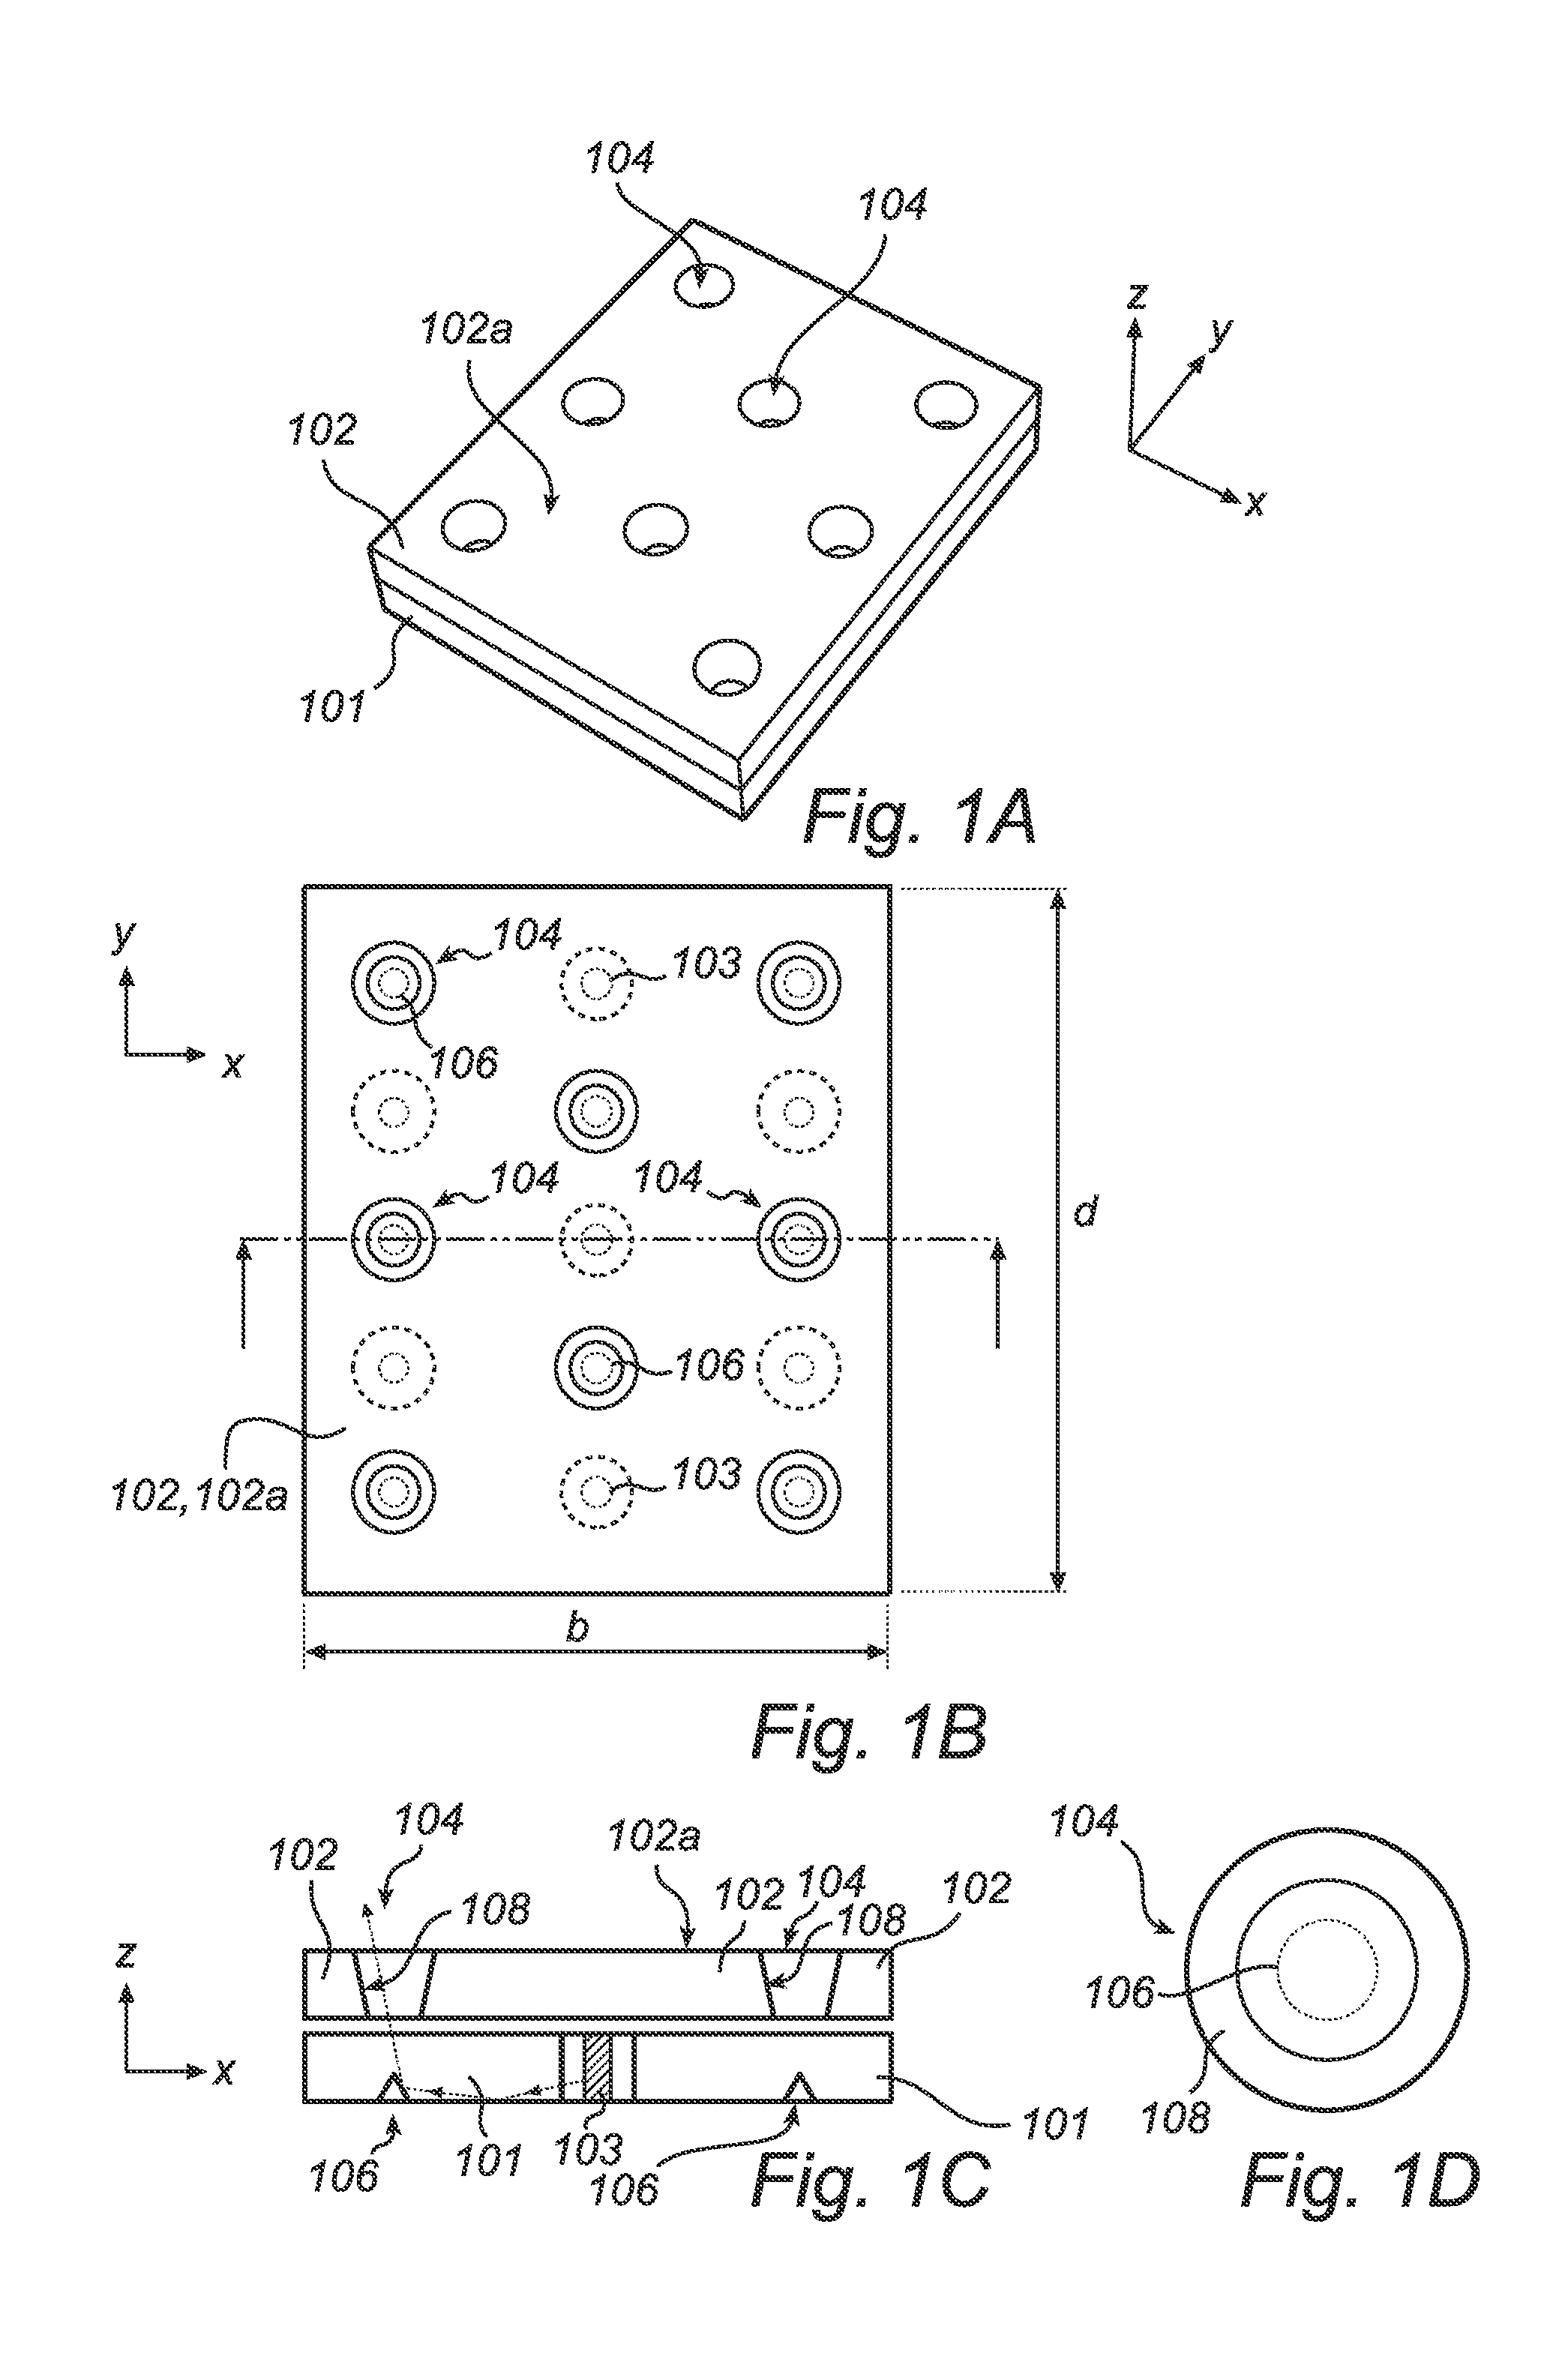 Luminaire arrangement with cover layer